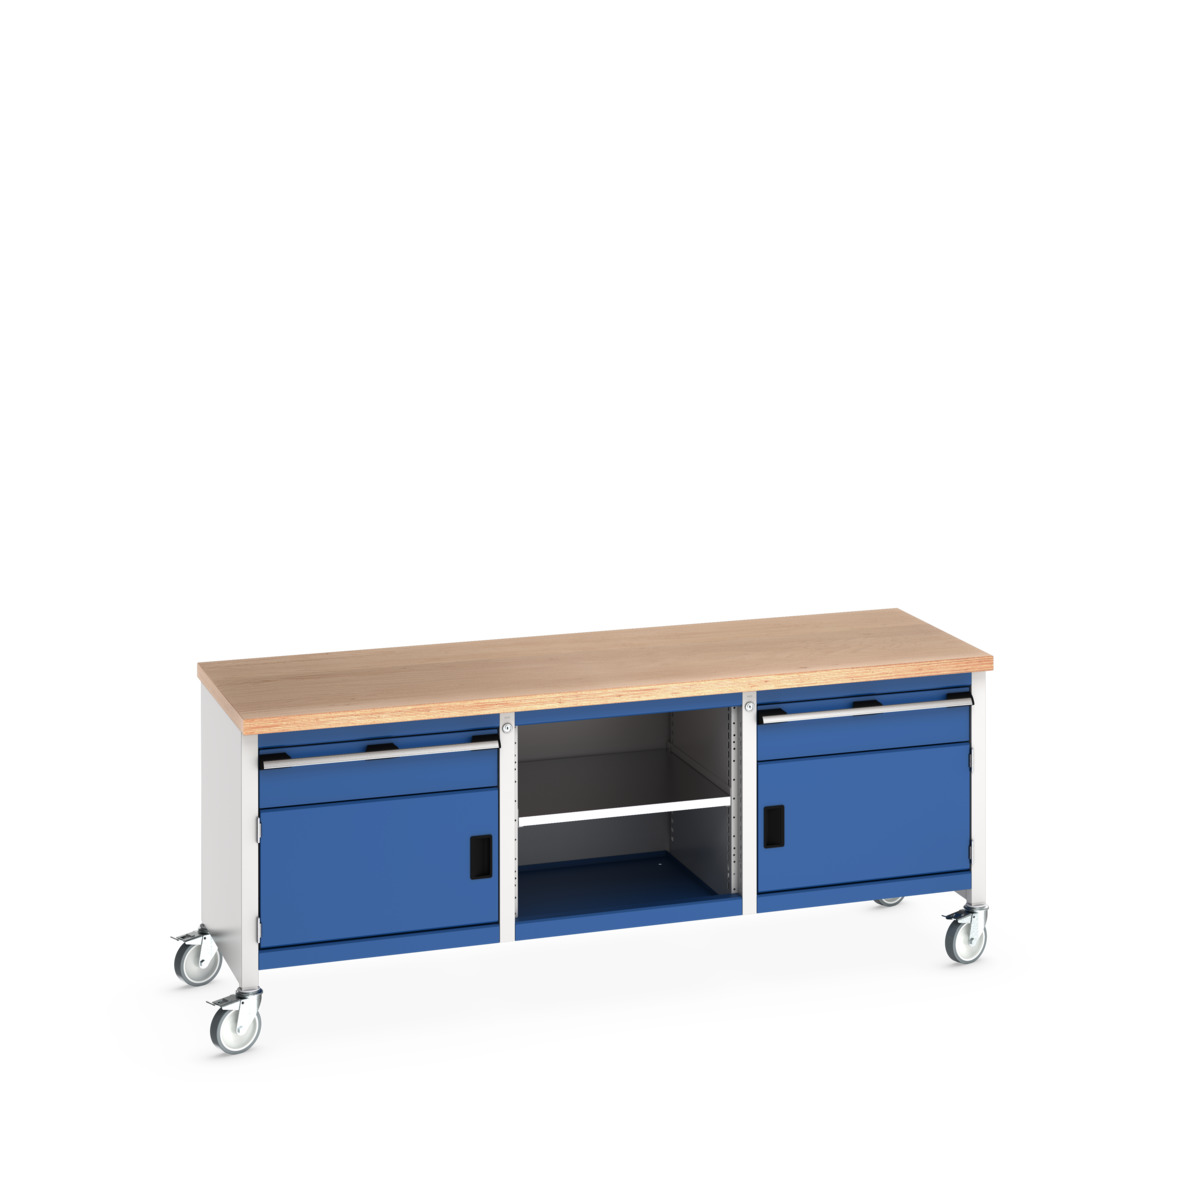 41002121.11V - cubio mobile storage bench (mpx)